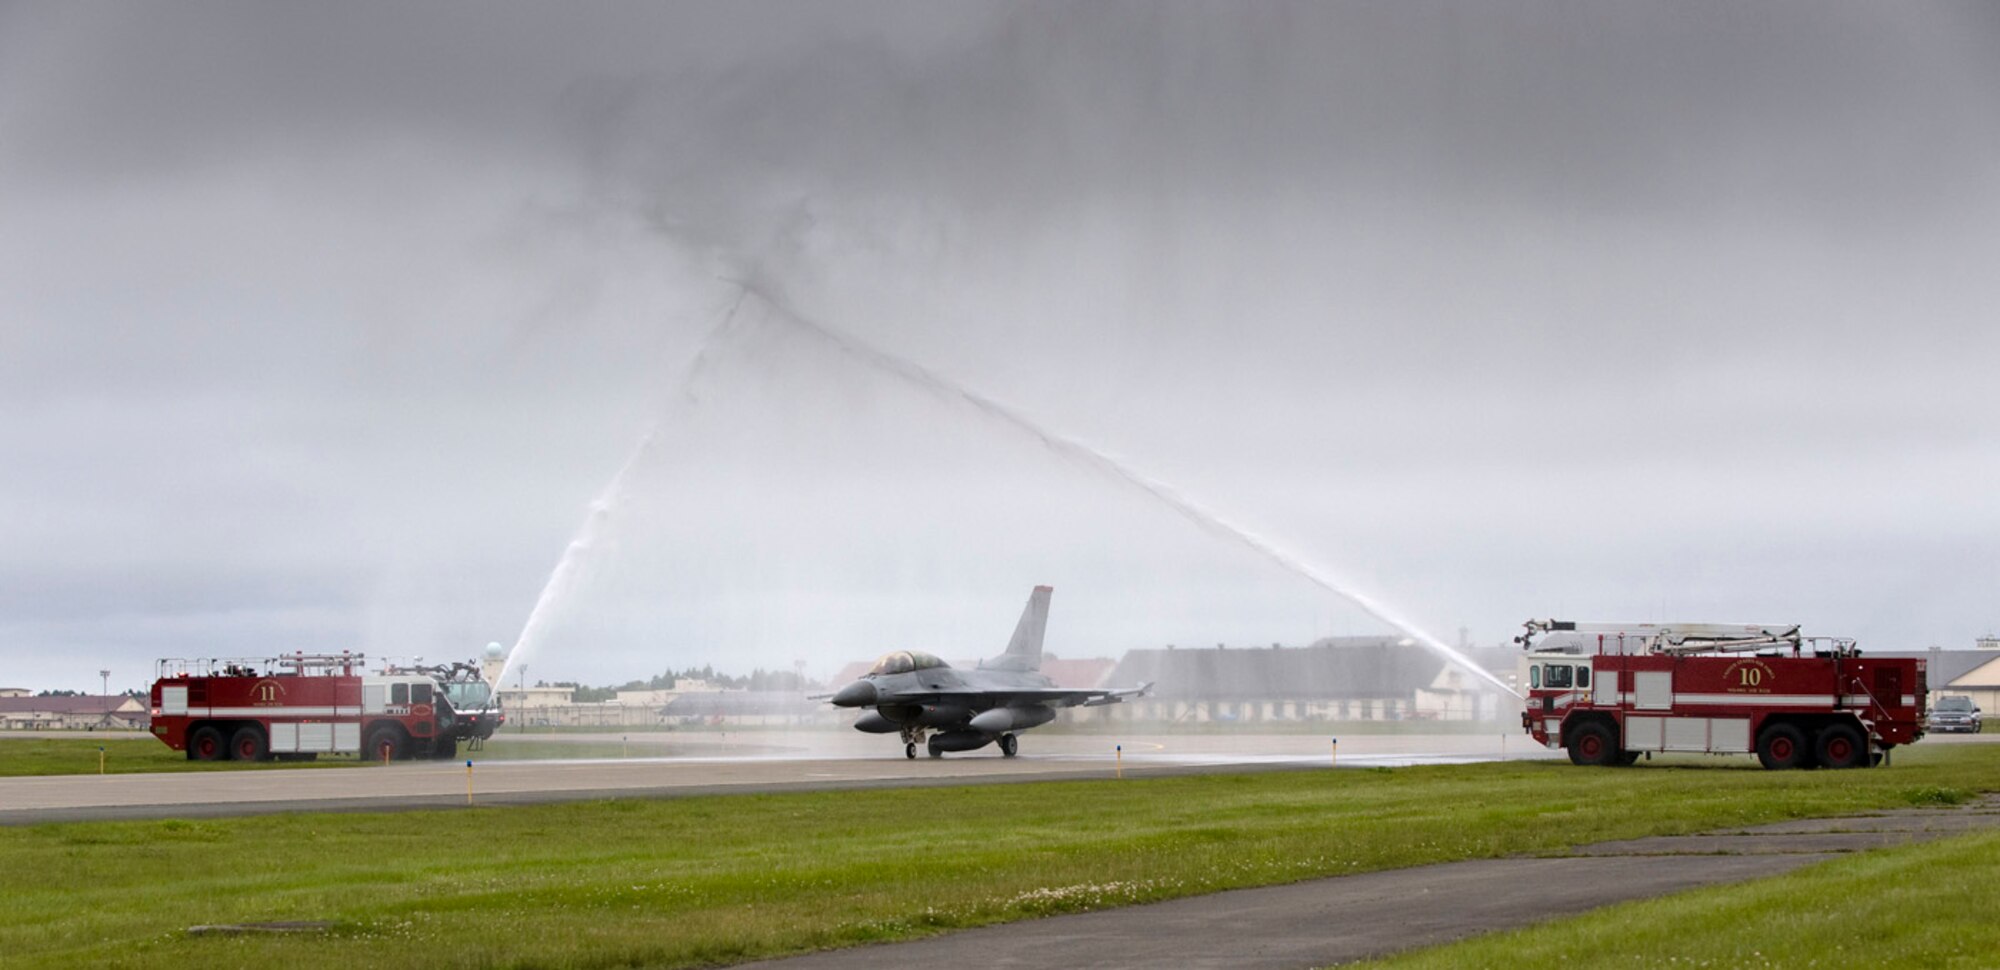 MISAWA AIR BASE, Japan -- Two fire trucks shower an F-16 Fighting Falcon as it leaves the tarmac June 15, 2009. A tradition normally reserved for pilots on their final flight, this shower commemorated Chief Master Sgt. Ricky Price, 35th Fighter Wing command chief master sergeant, on the week of his retirement. (U.S. Air Force photo by Staff Sgt. Samuel Morse)